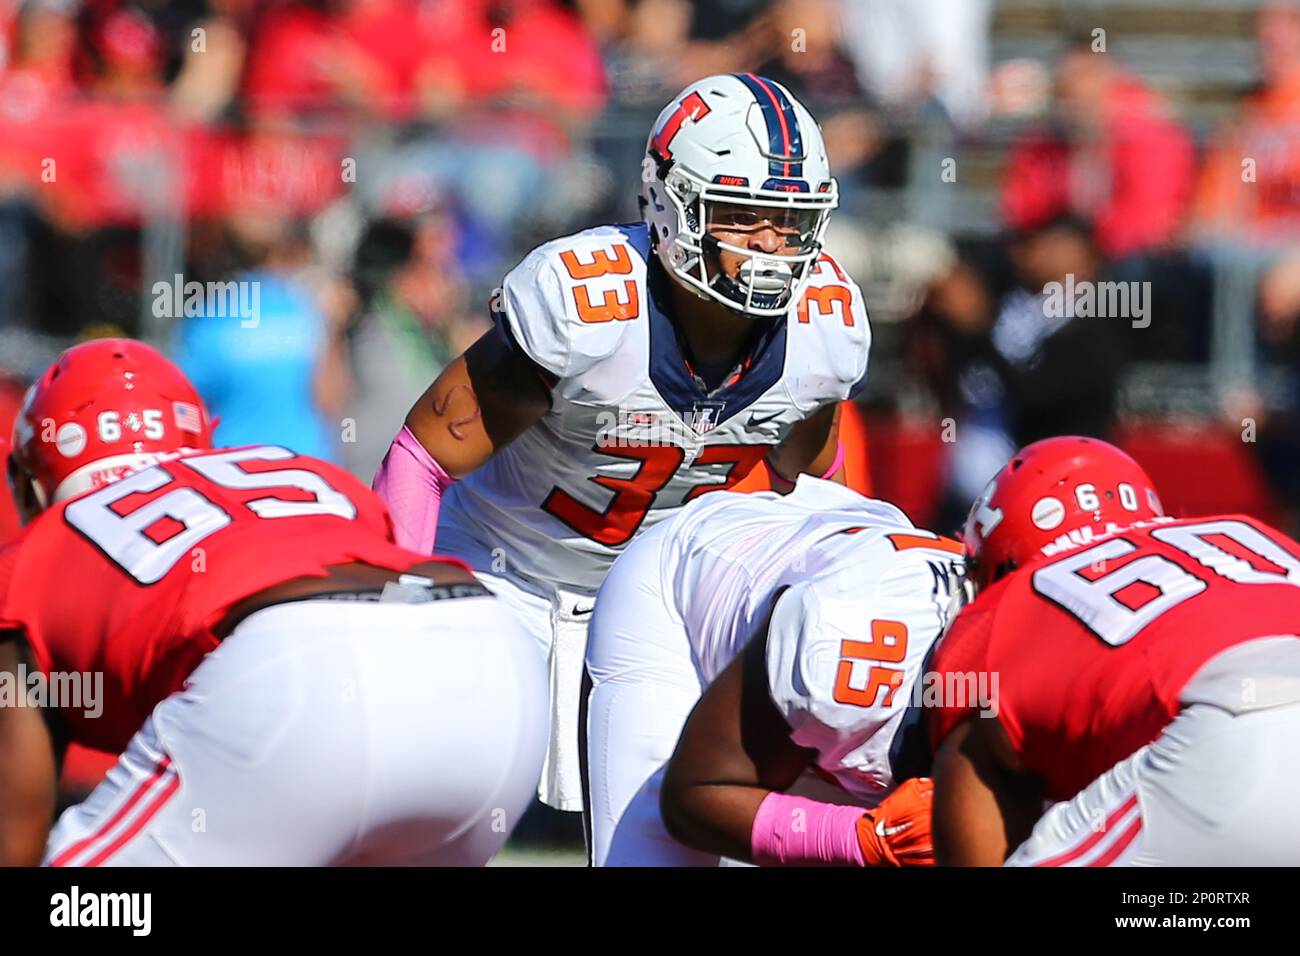 15-oct-2016-illinois-fighting-illini-linebacker-tre-watson-33-during-the-game-between-the-rutgers-scarlet-knights-and-the-illinois-fighting-illini-played-at-high-point-solutions-stadium-in-piscatawaynj-photo-by-rich-graessleicon-sportswire-icon-sportswire-via-ap-images-2P0RTXR.jpg